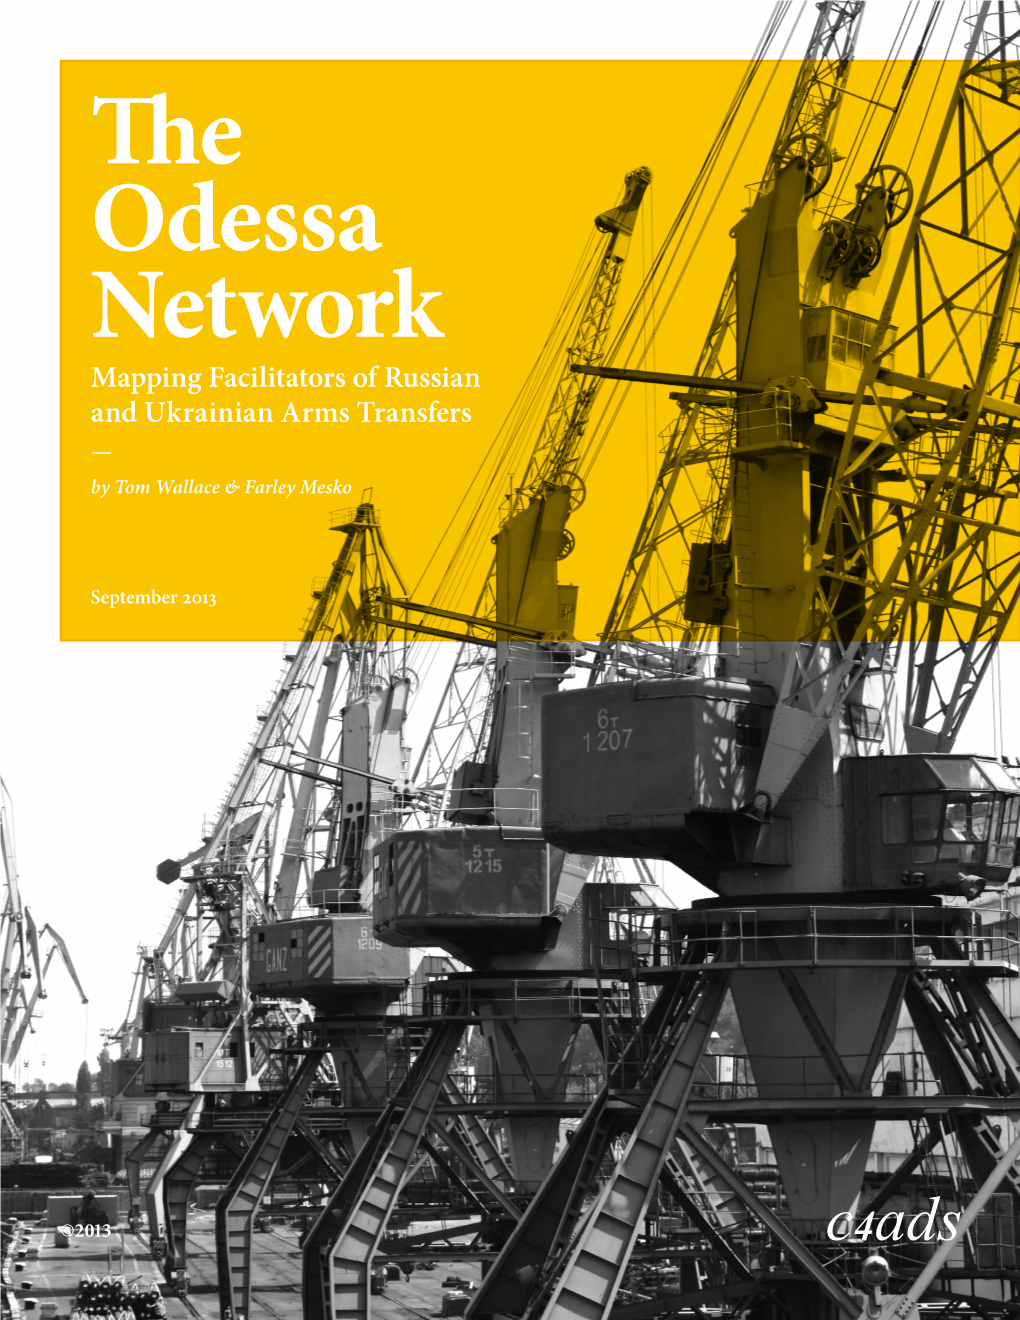 E Odessa Network Mapping Facilitators of Russian and Ukrainian Arms Transfers — by Tom Wallace & Farley Mesko